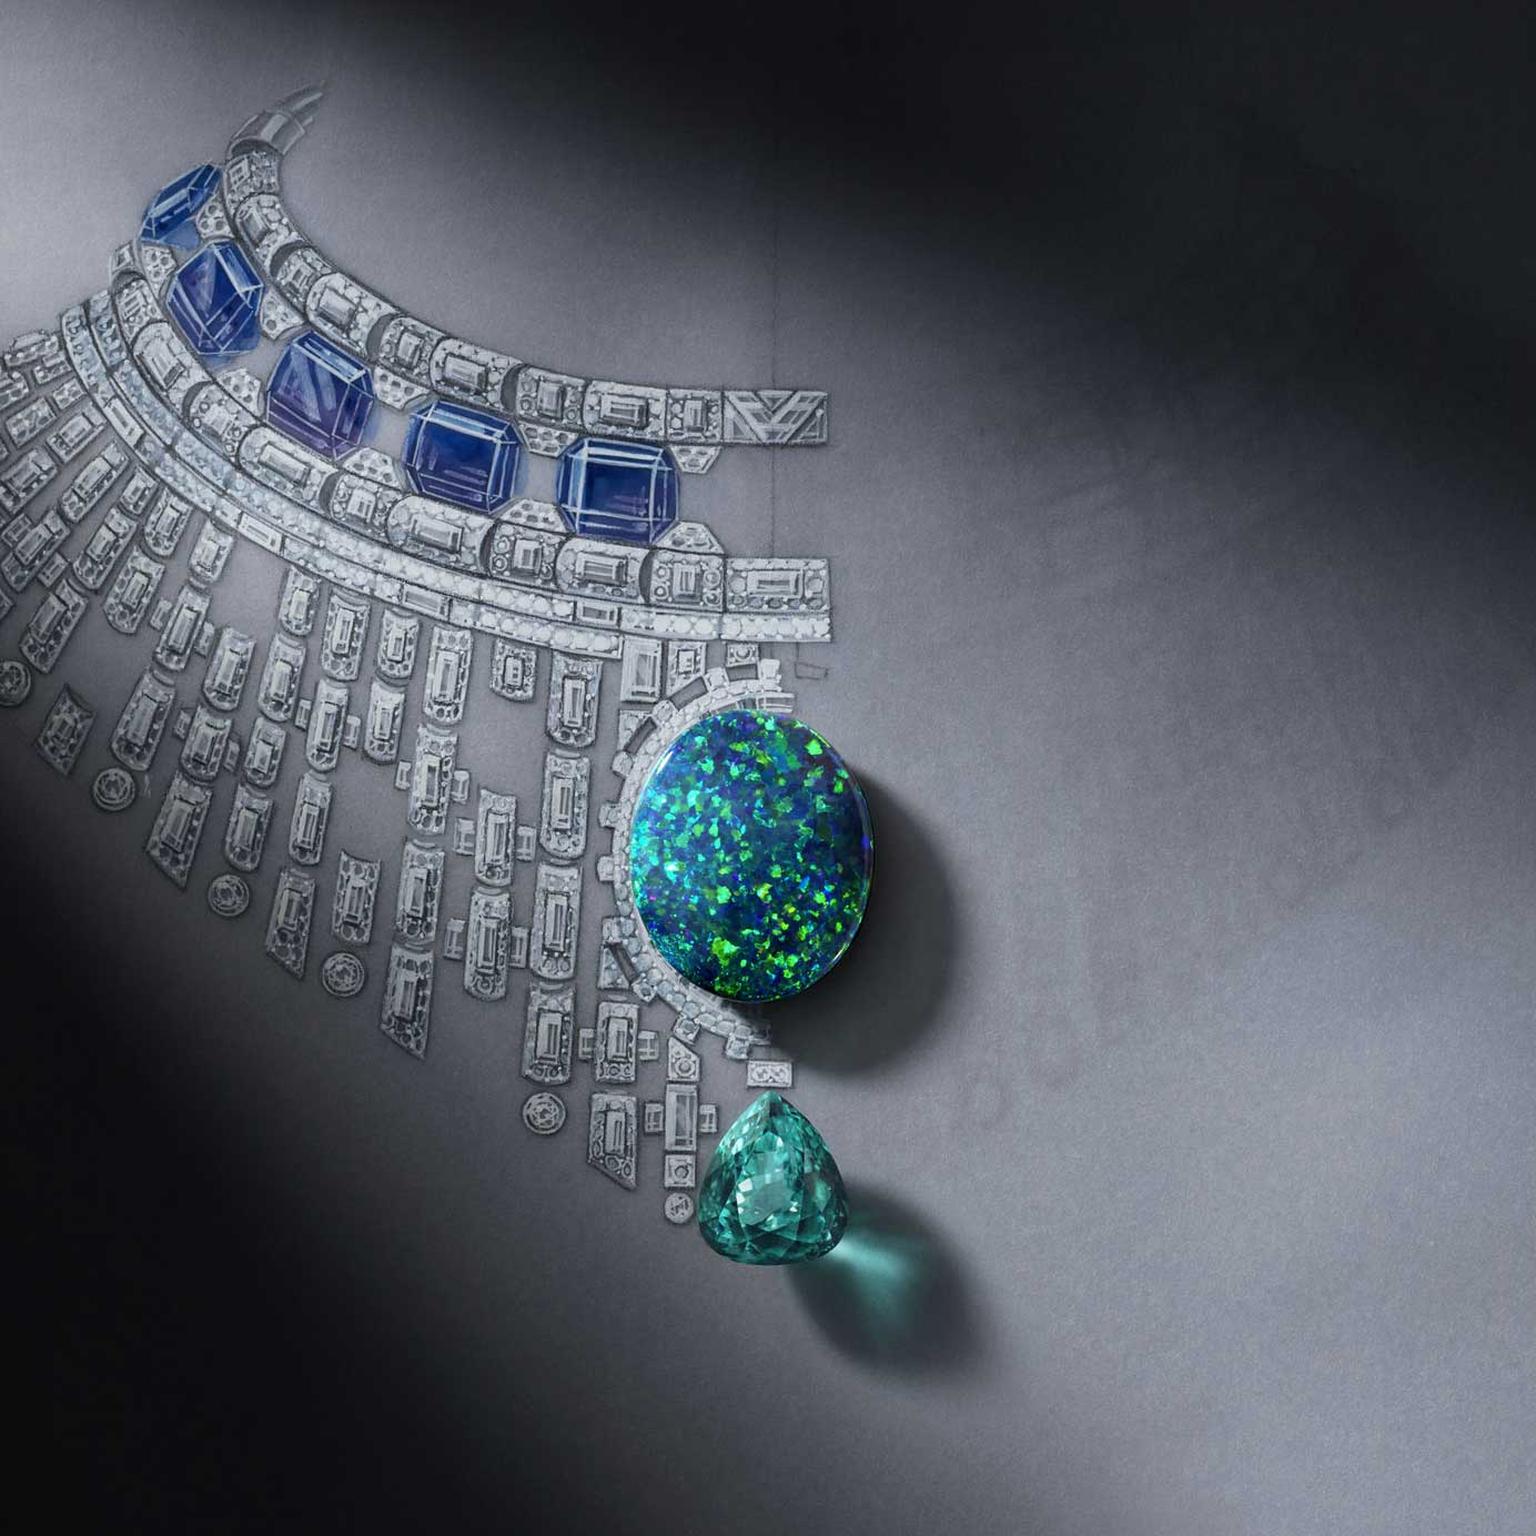 Louis Vuitton's Deep Time high jewellery collection is a dazzling